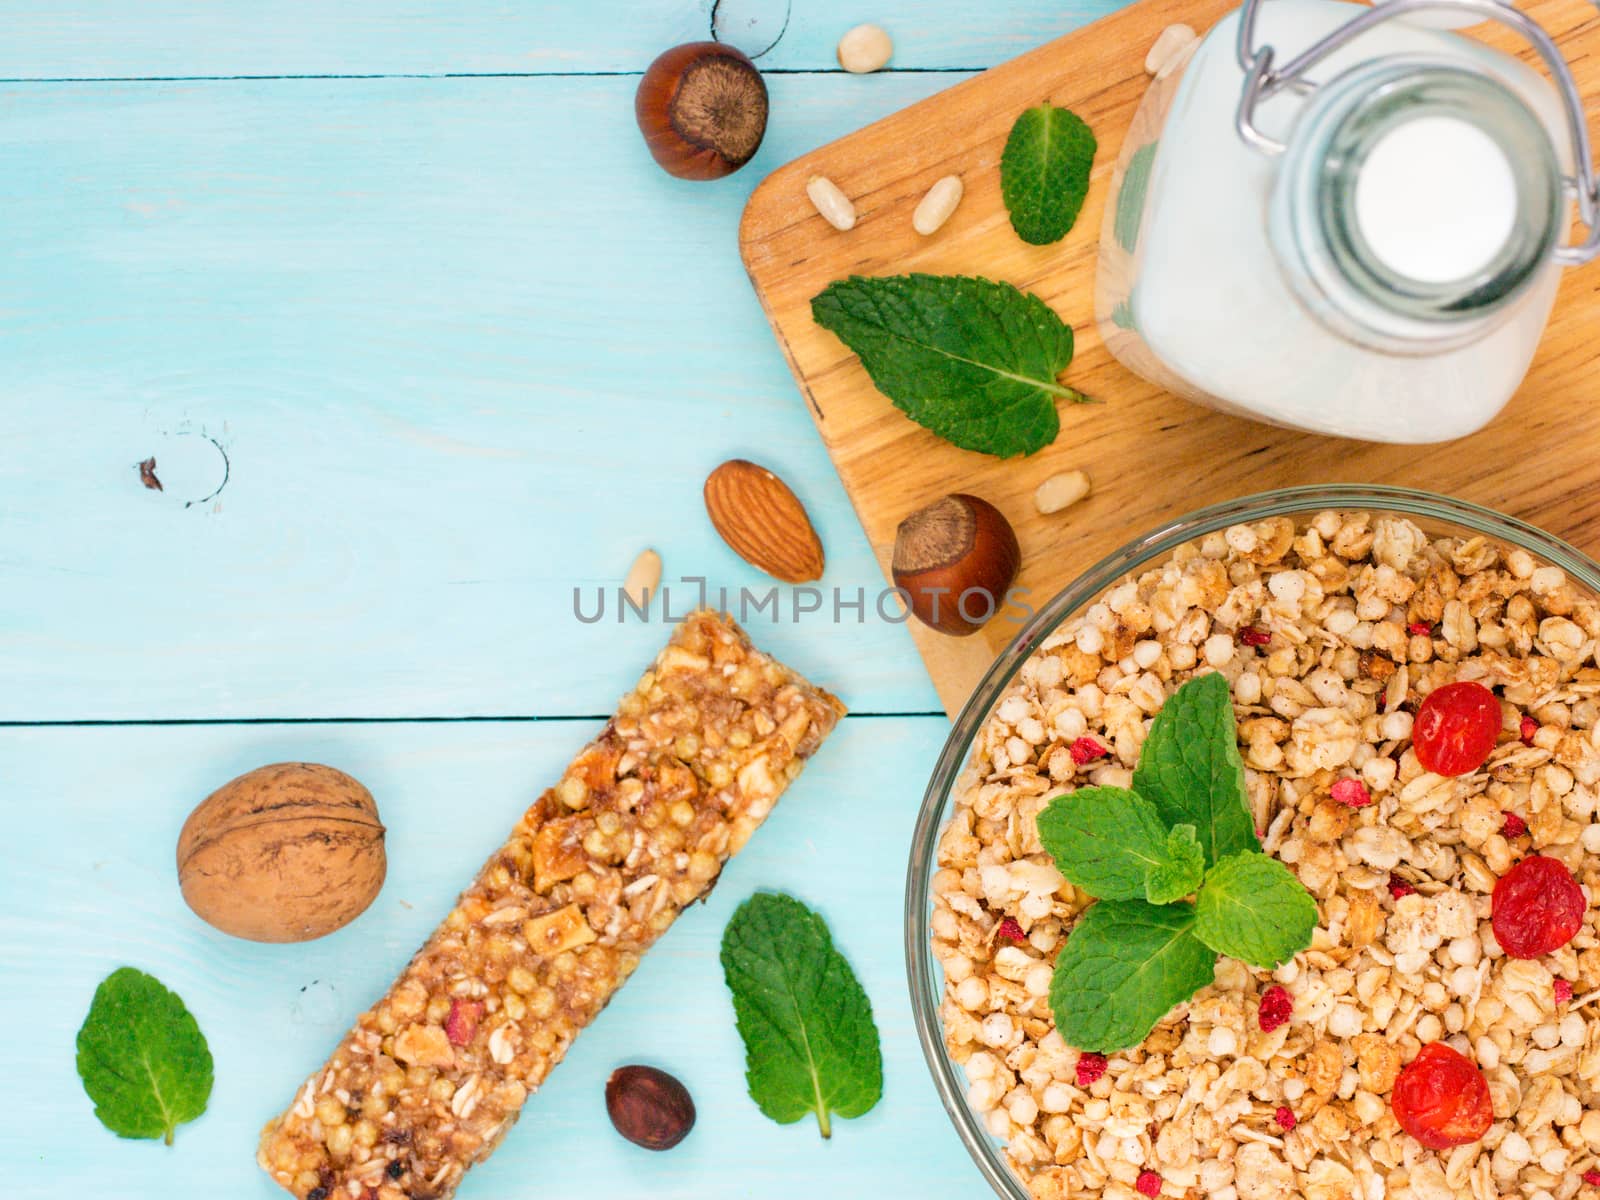 Colorful health breakfast concept. Muesli, milk, granola bar nuts on blue wooden background. Top view or flat lay. Copy space